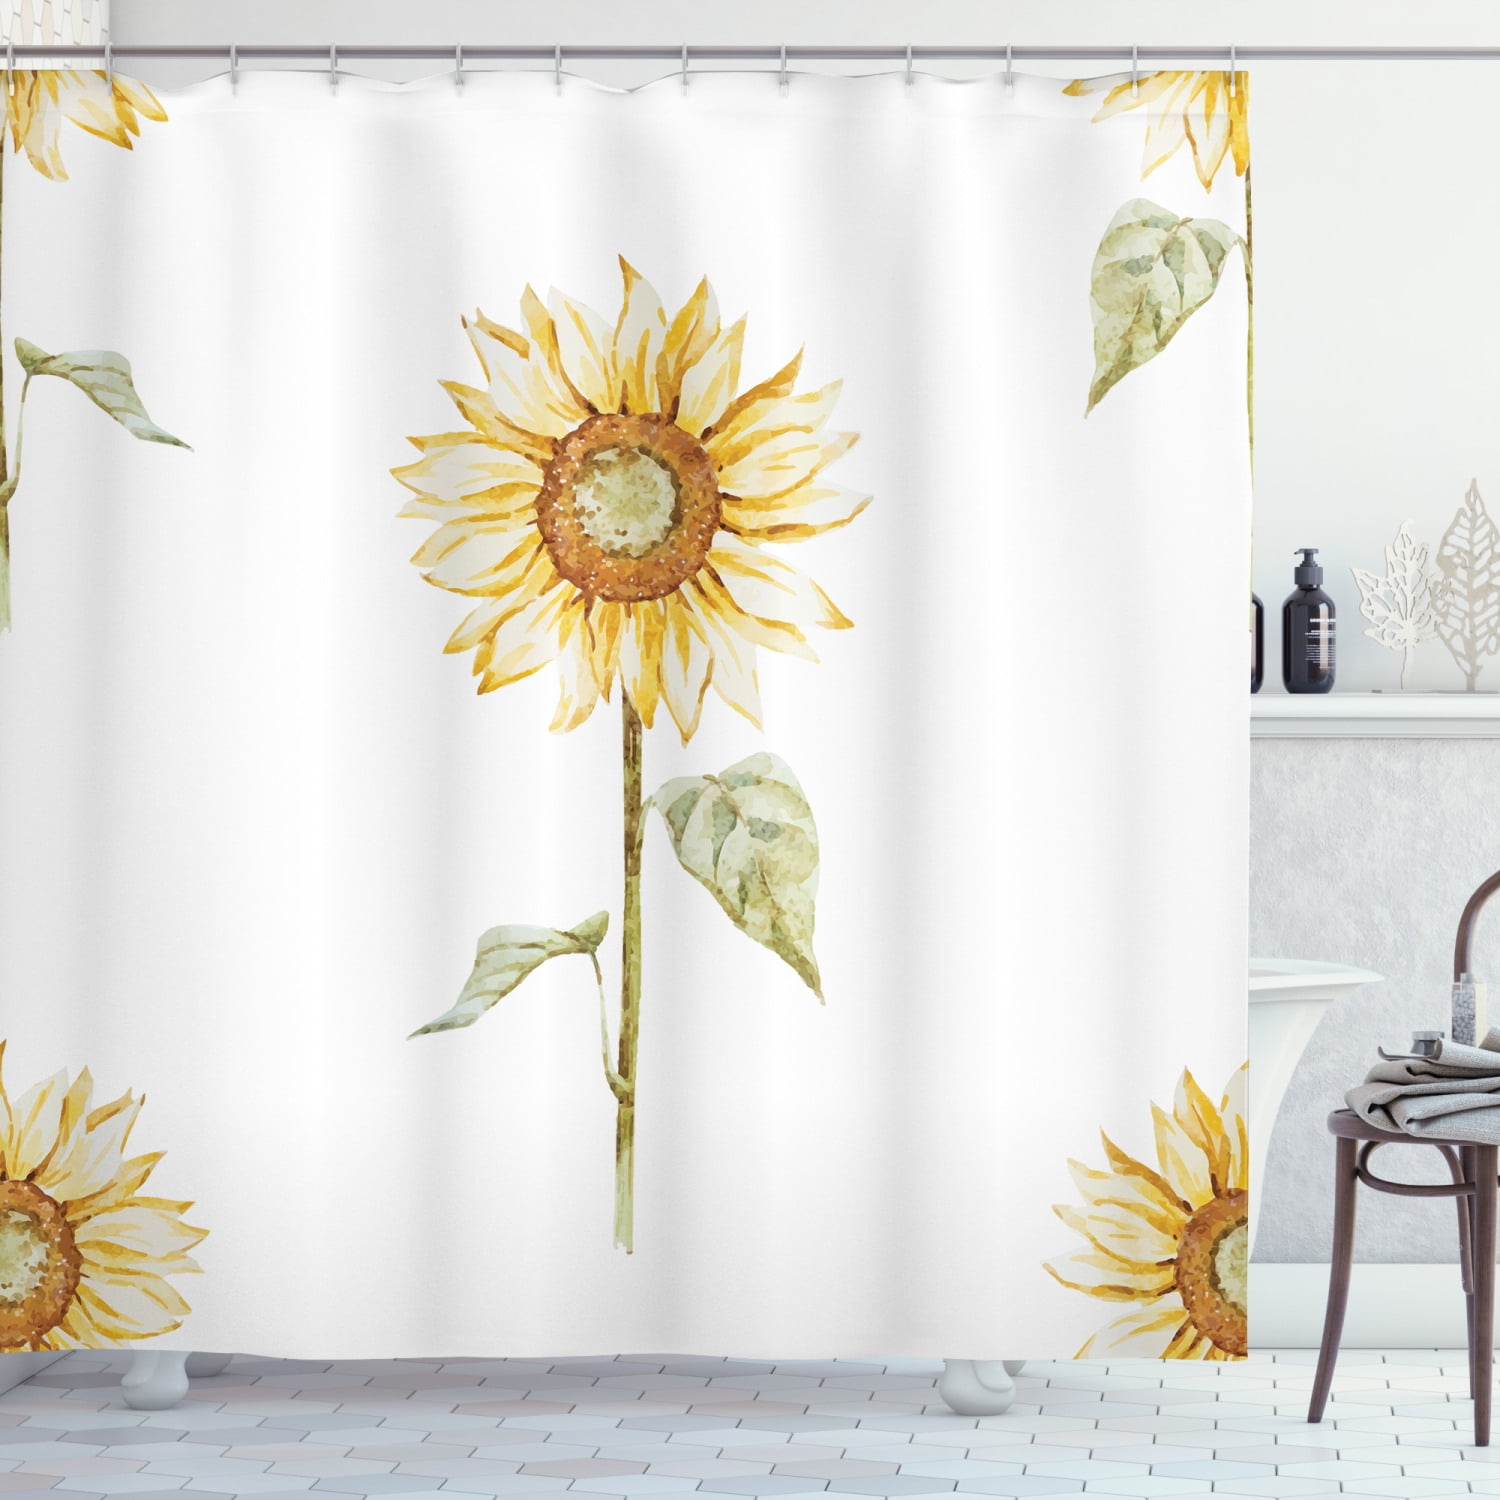 Details about   Hand Painting Sunflowers Yellow Motorcycle Shower Curtain Set Bathroom Decor 72"